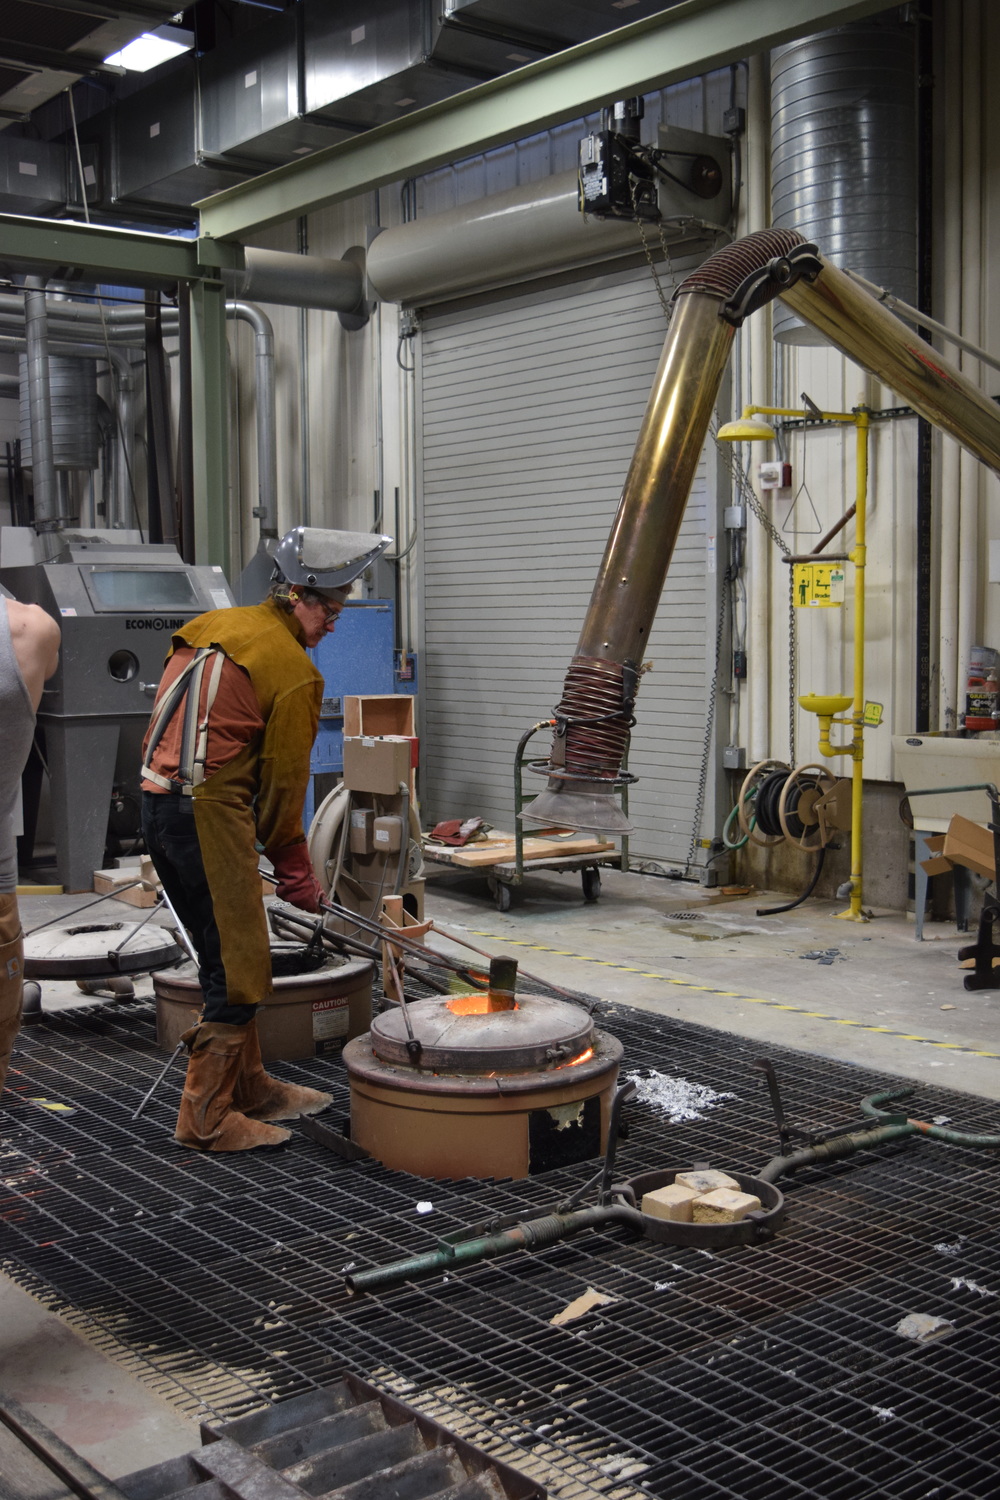  Sculptor and Art Metals instructor Peter Flanary loading the forge with bronze. Take a look at his work  HERE .   